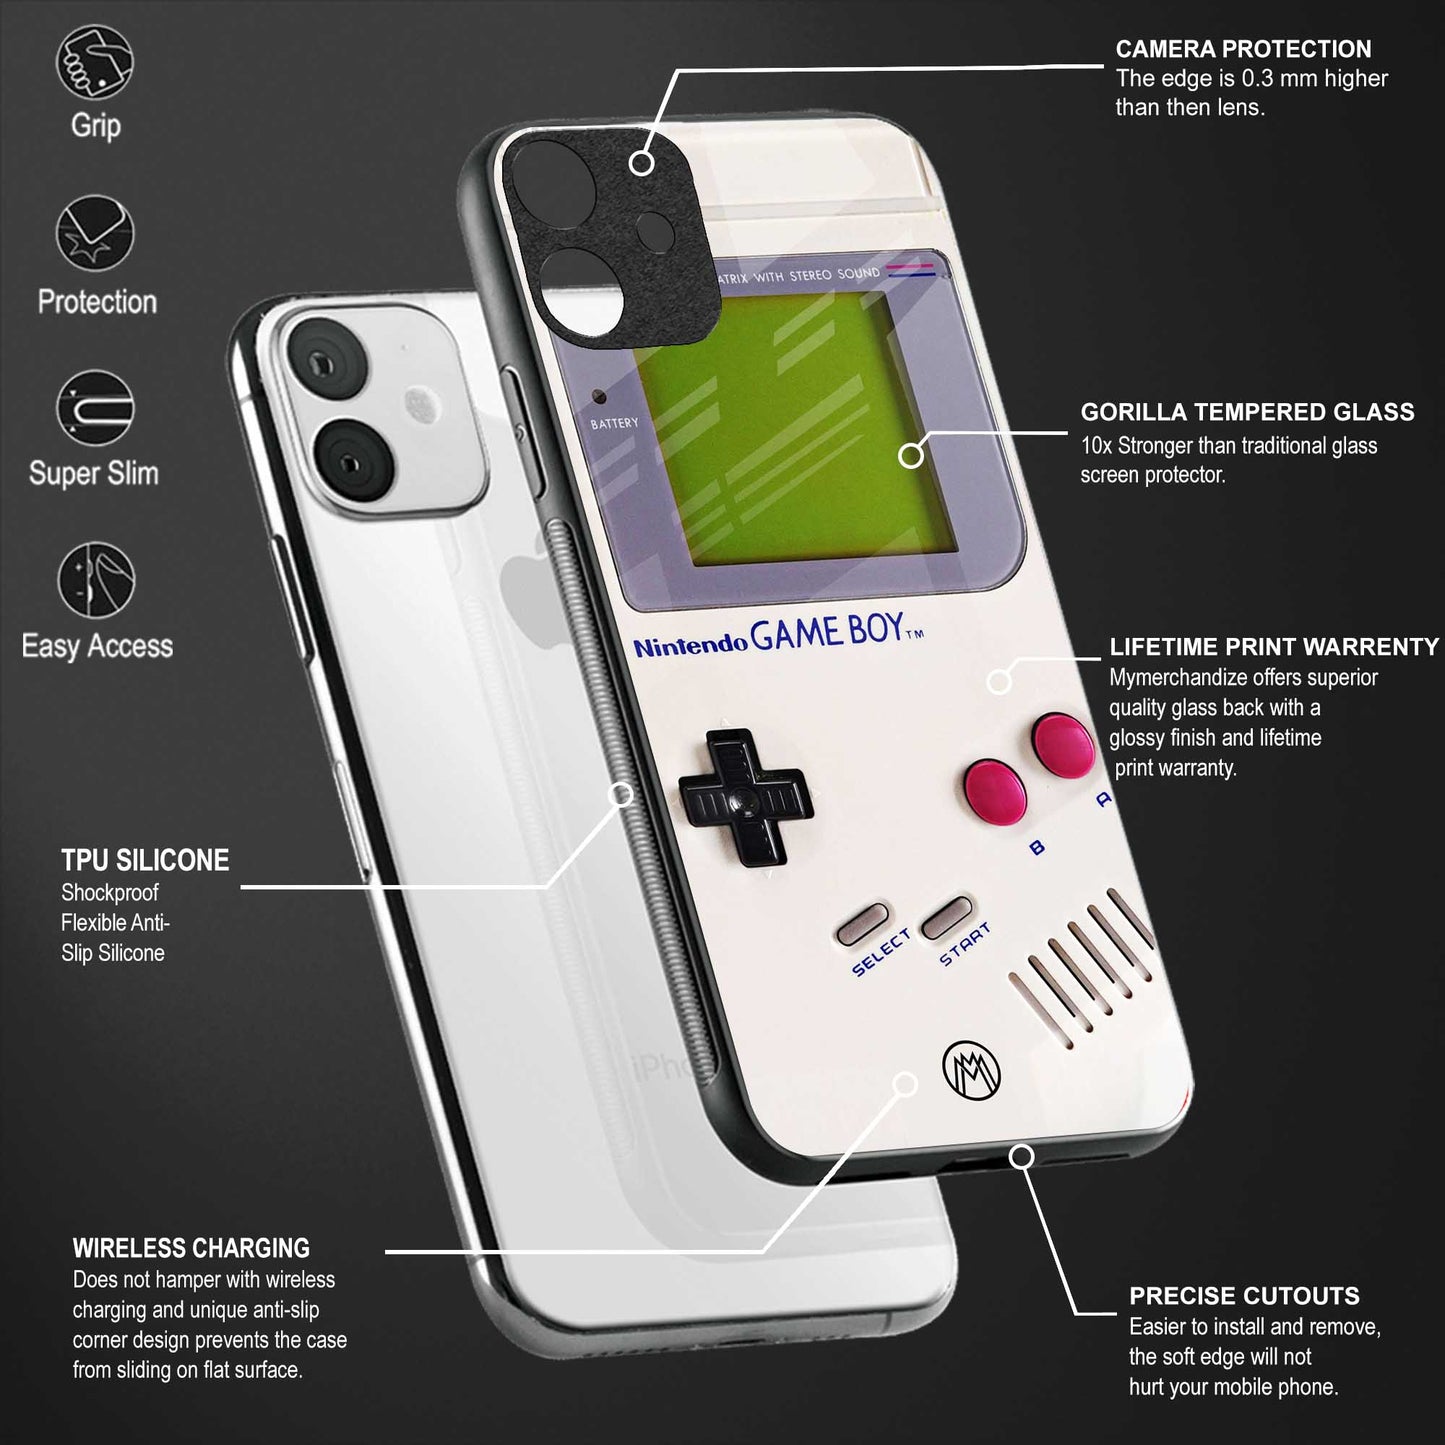 gameboy classic back phone cover | glass case for samsung galaxy a23